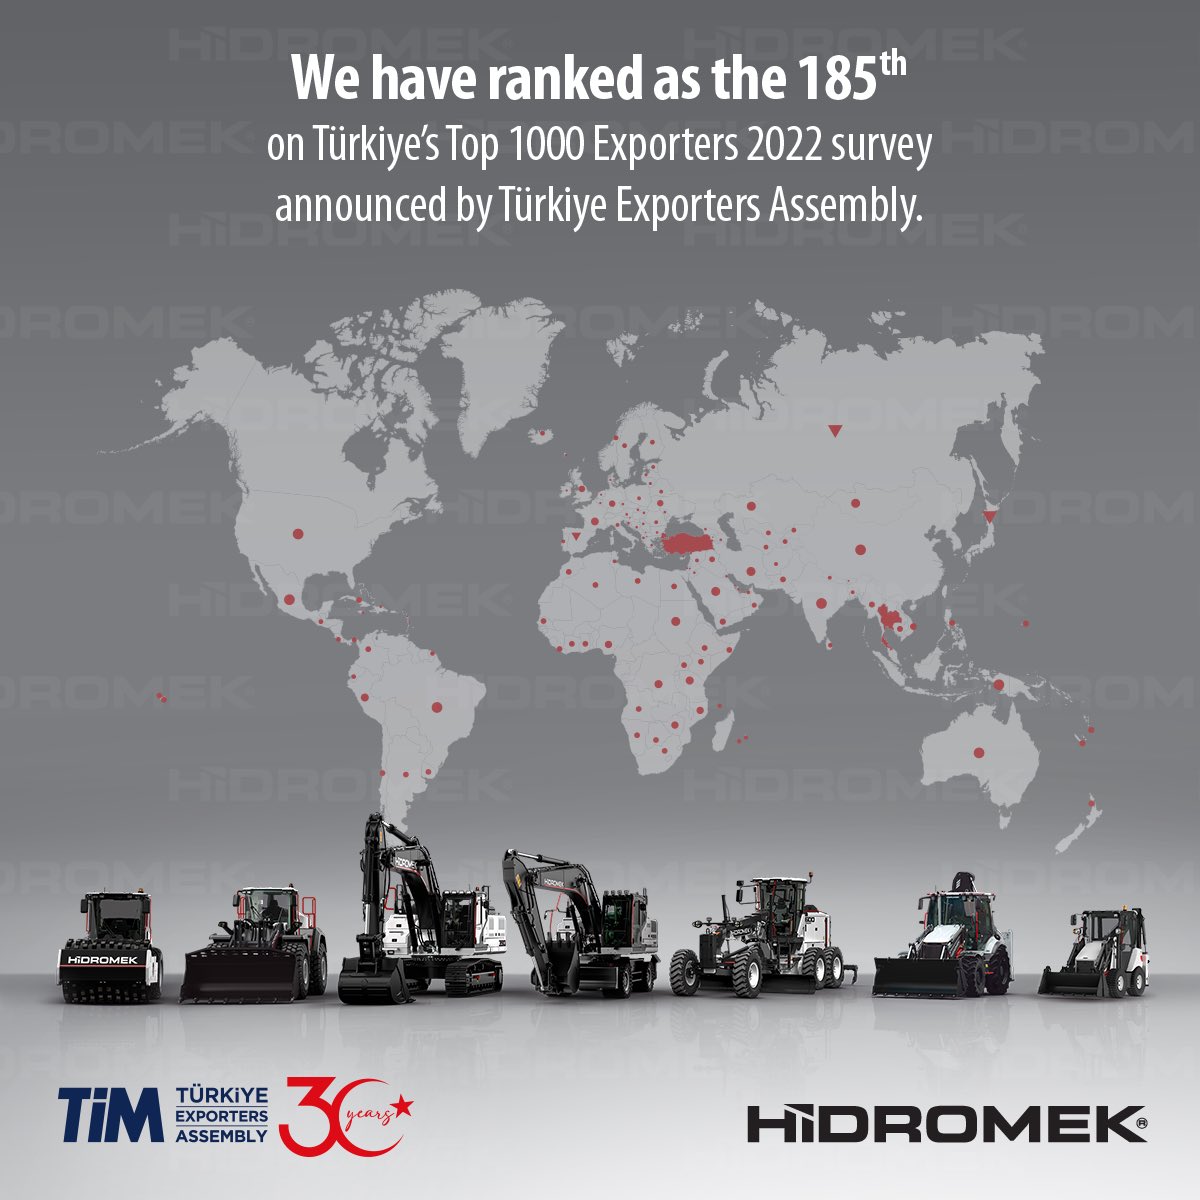 We rank as the 185th on Türkiye’s Top 1000 Exporters list and as the 4th in the sectoral ranking of machinery and accessories according to 2022 data.